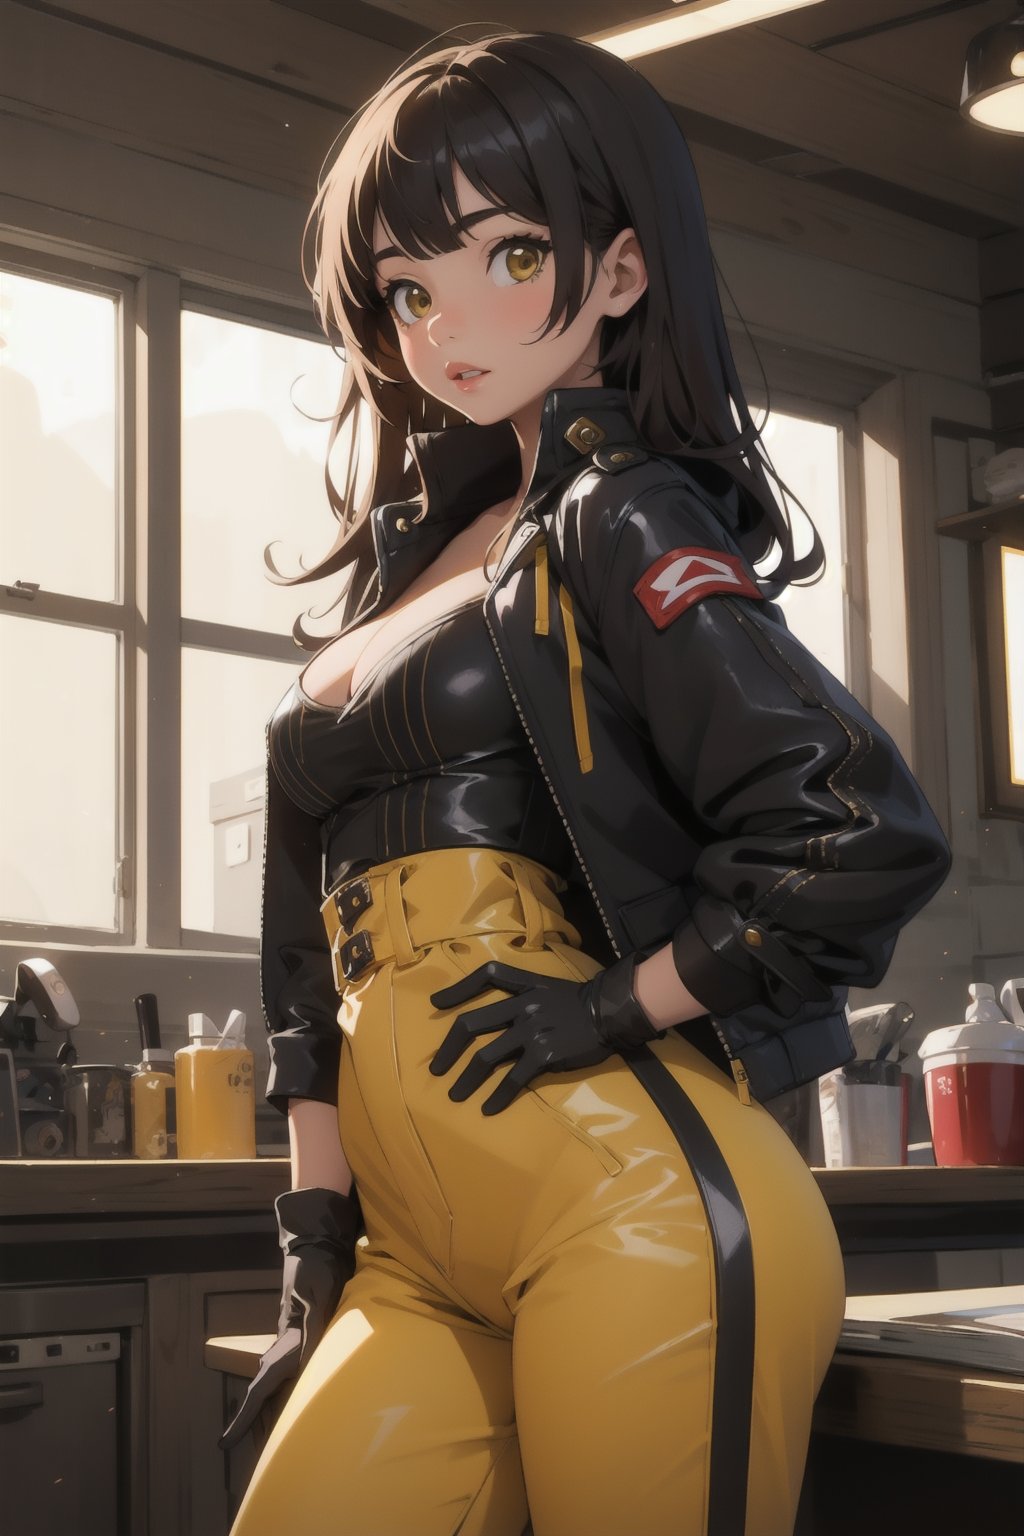 masterpiece,detailed,perfect lighting, 1girl wearing yellow outfit with black striped,bangs,gloves, jacket,sexy,beautiful girl,pretty